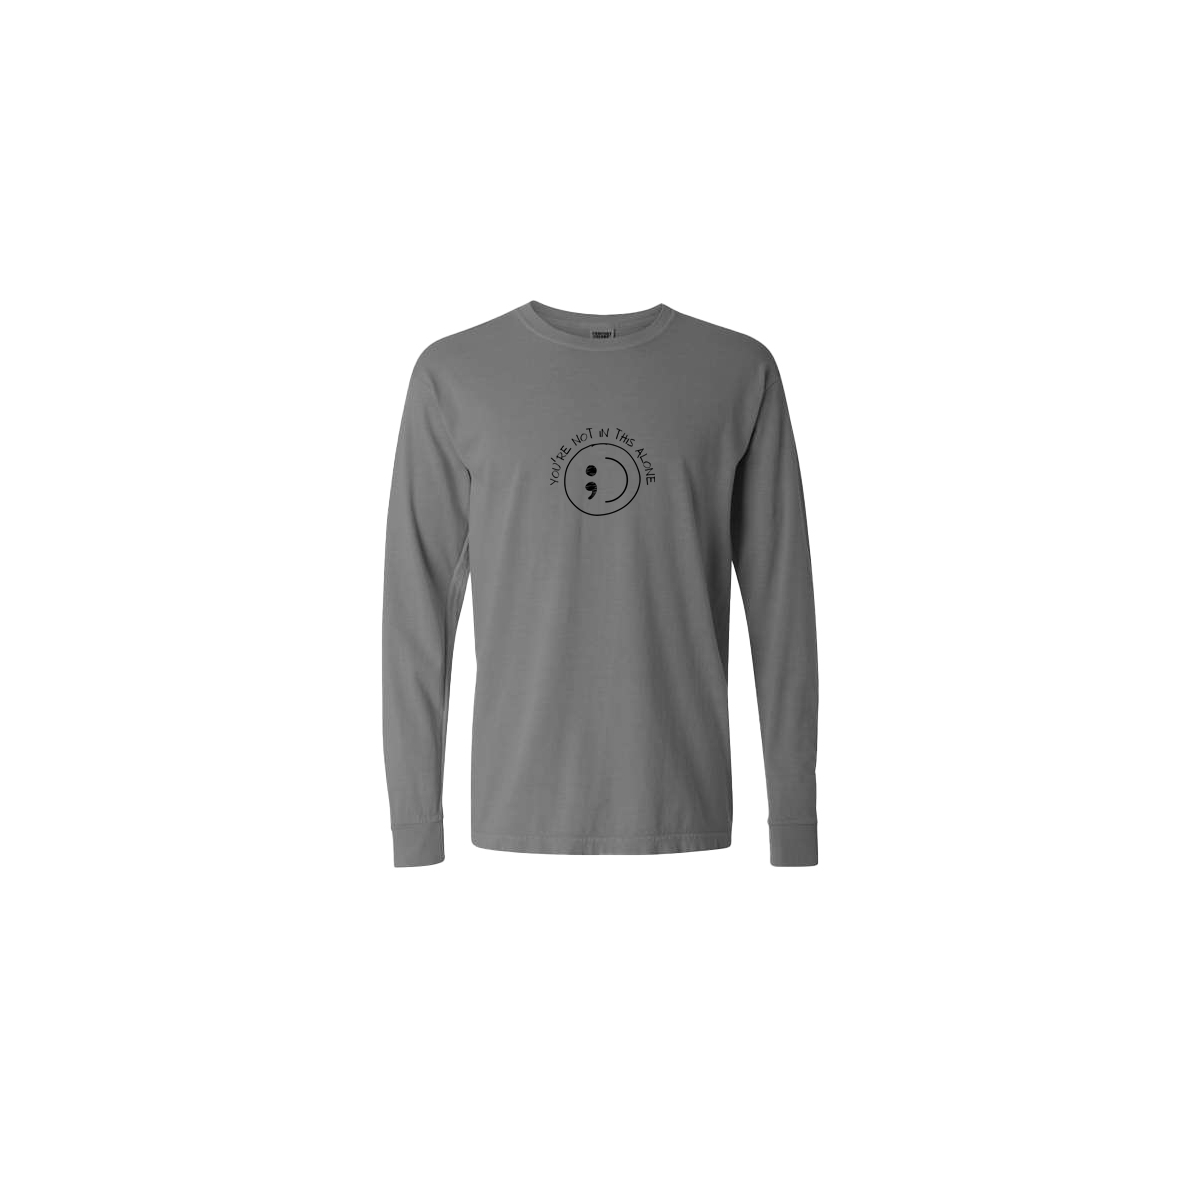 You're Not In This Alone Embroidered Grey Long Sleeve Tshirt - Mental Health Awareness Clothing